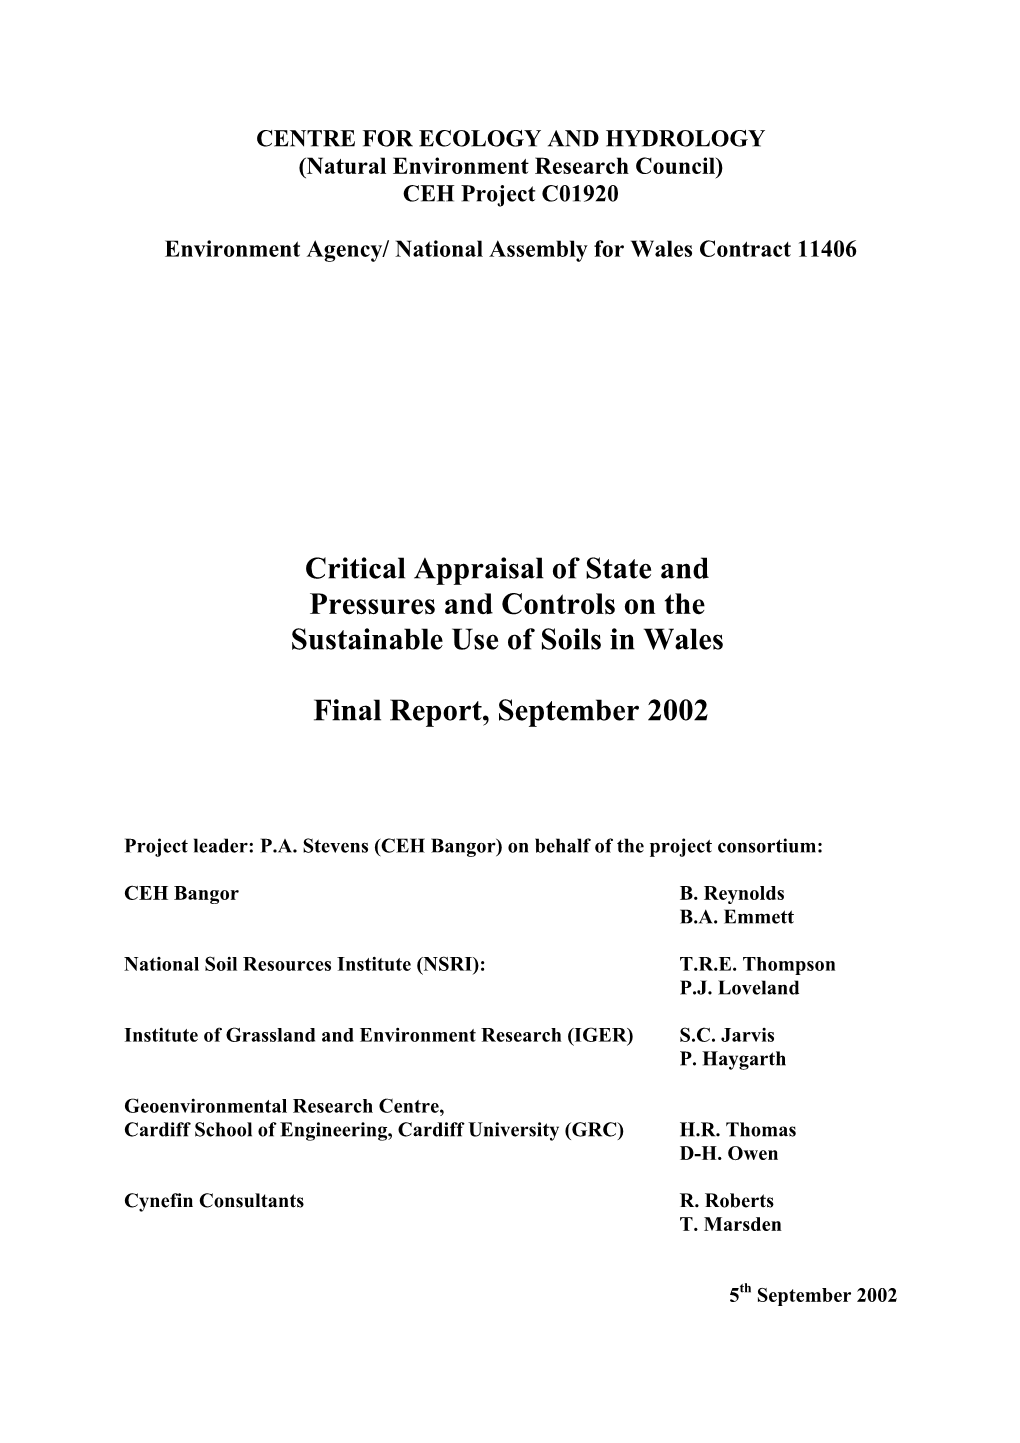 Appraisal of State, Pressures and Controls on The